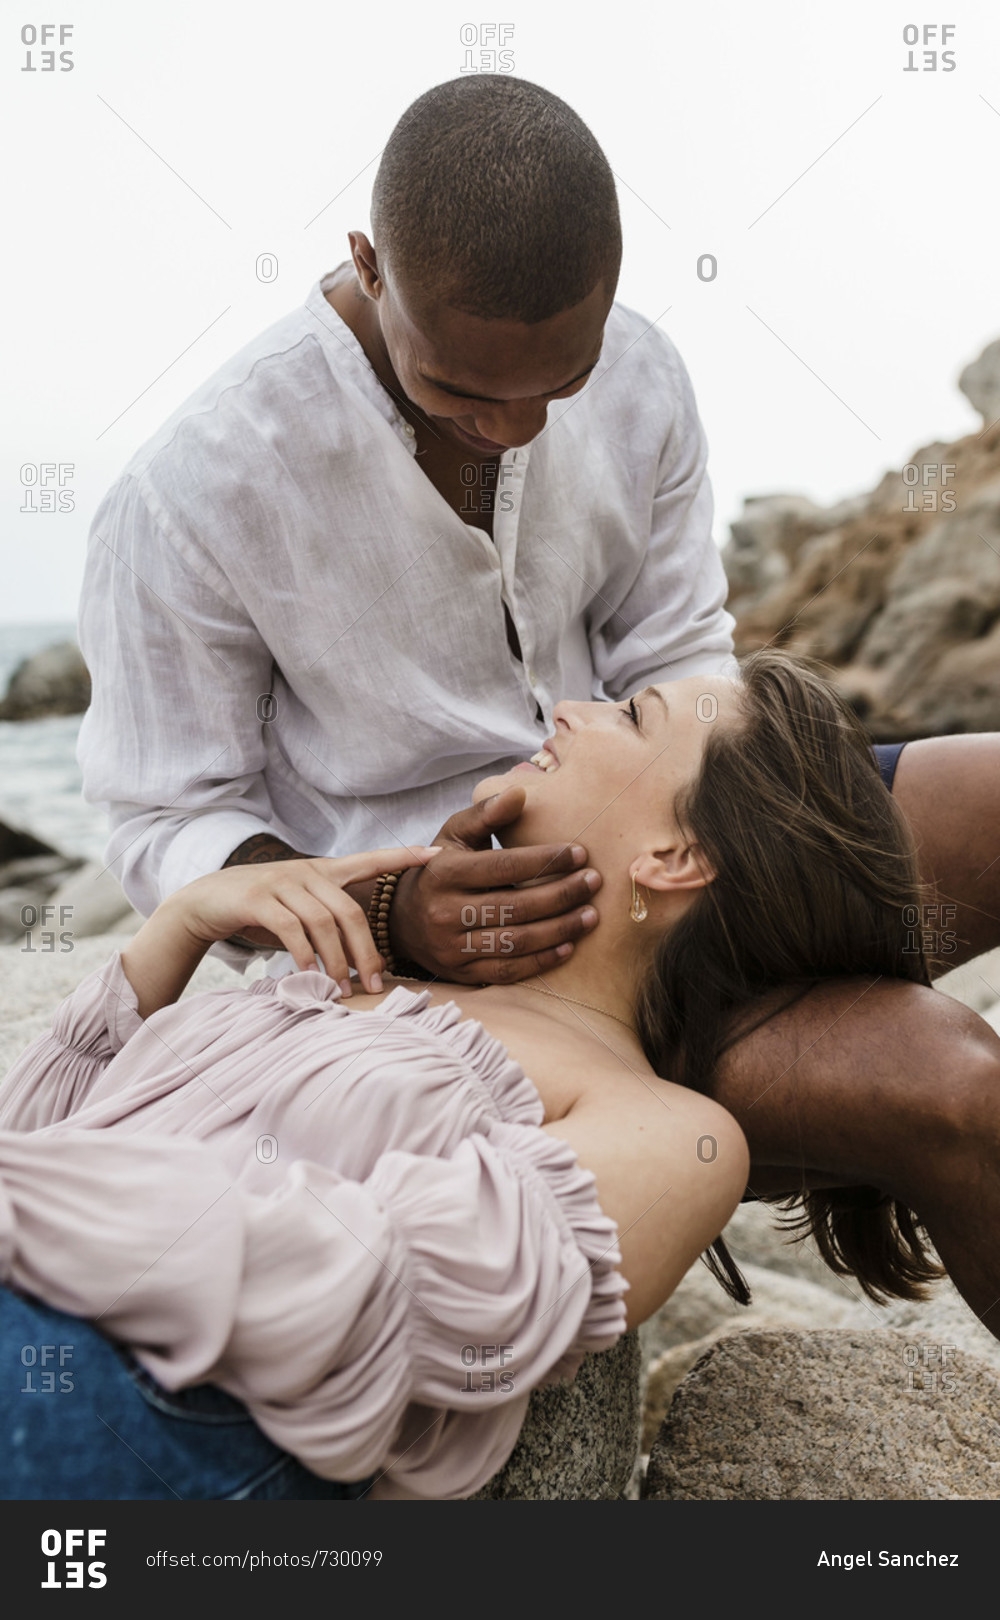 An interracial couple hangs out on rock formation in a cloudy day